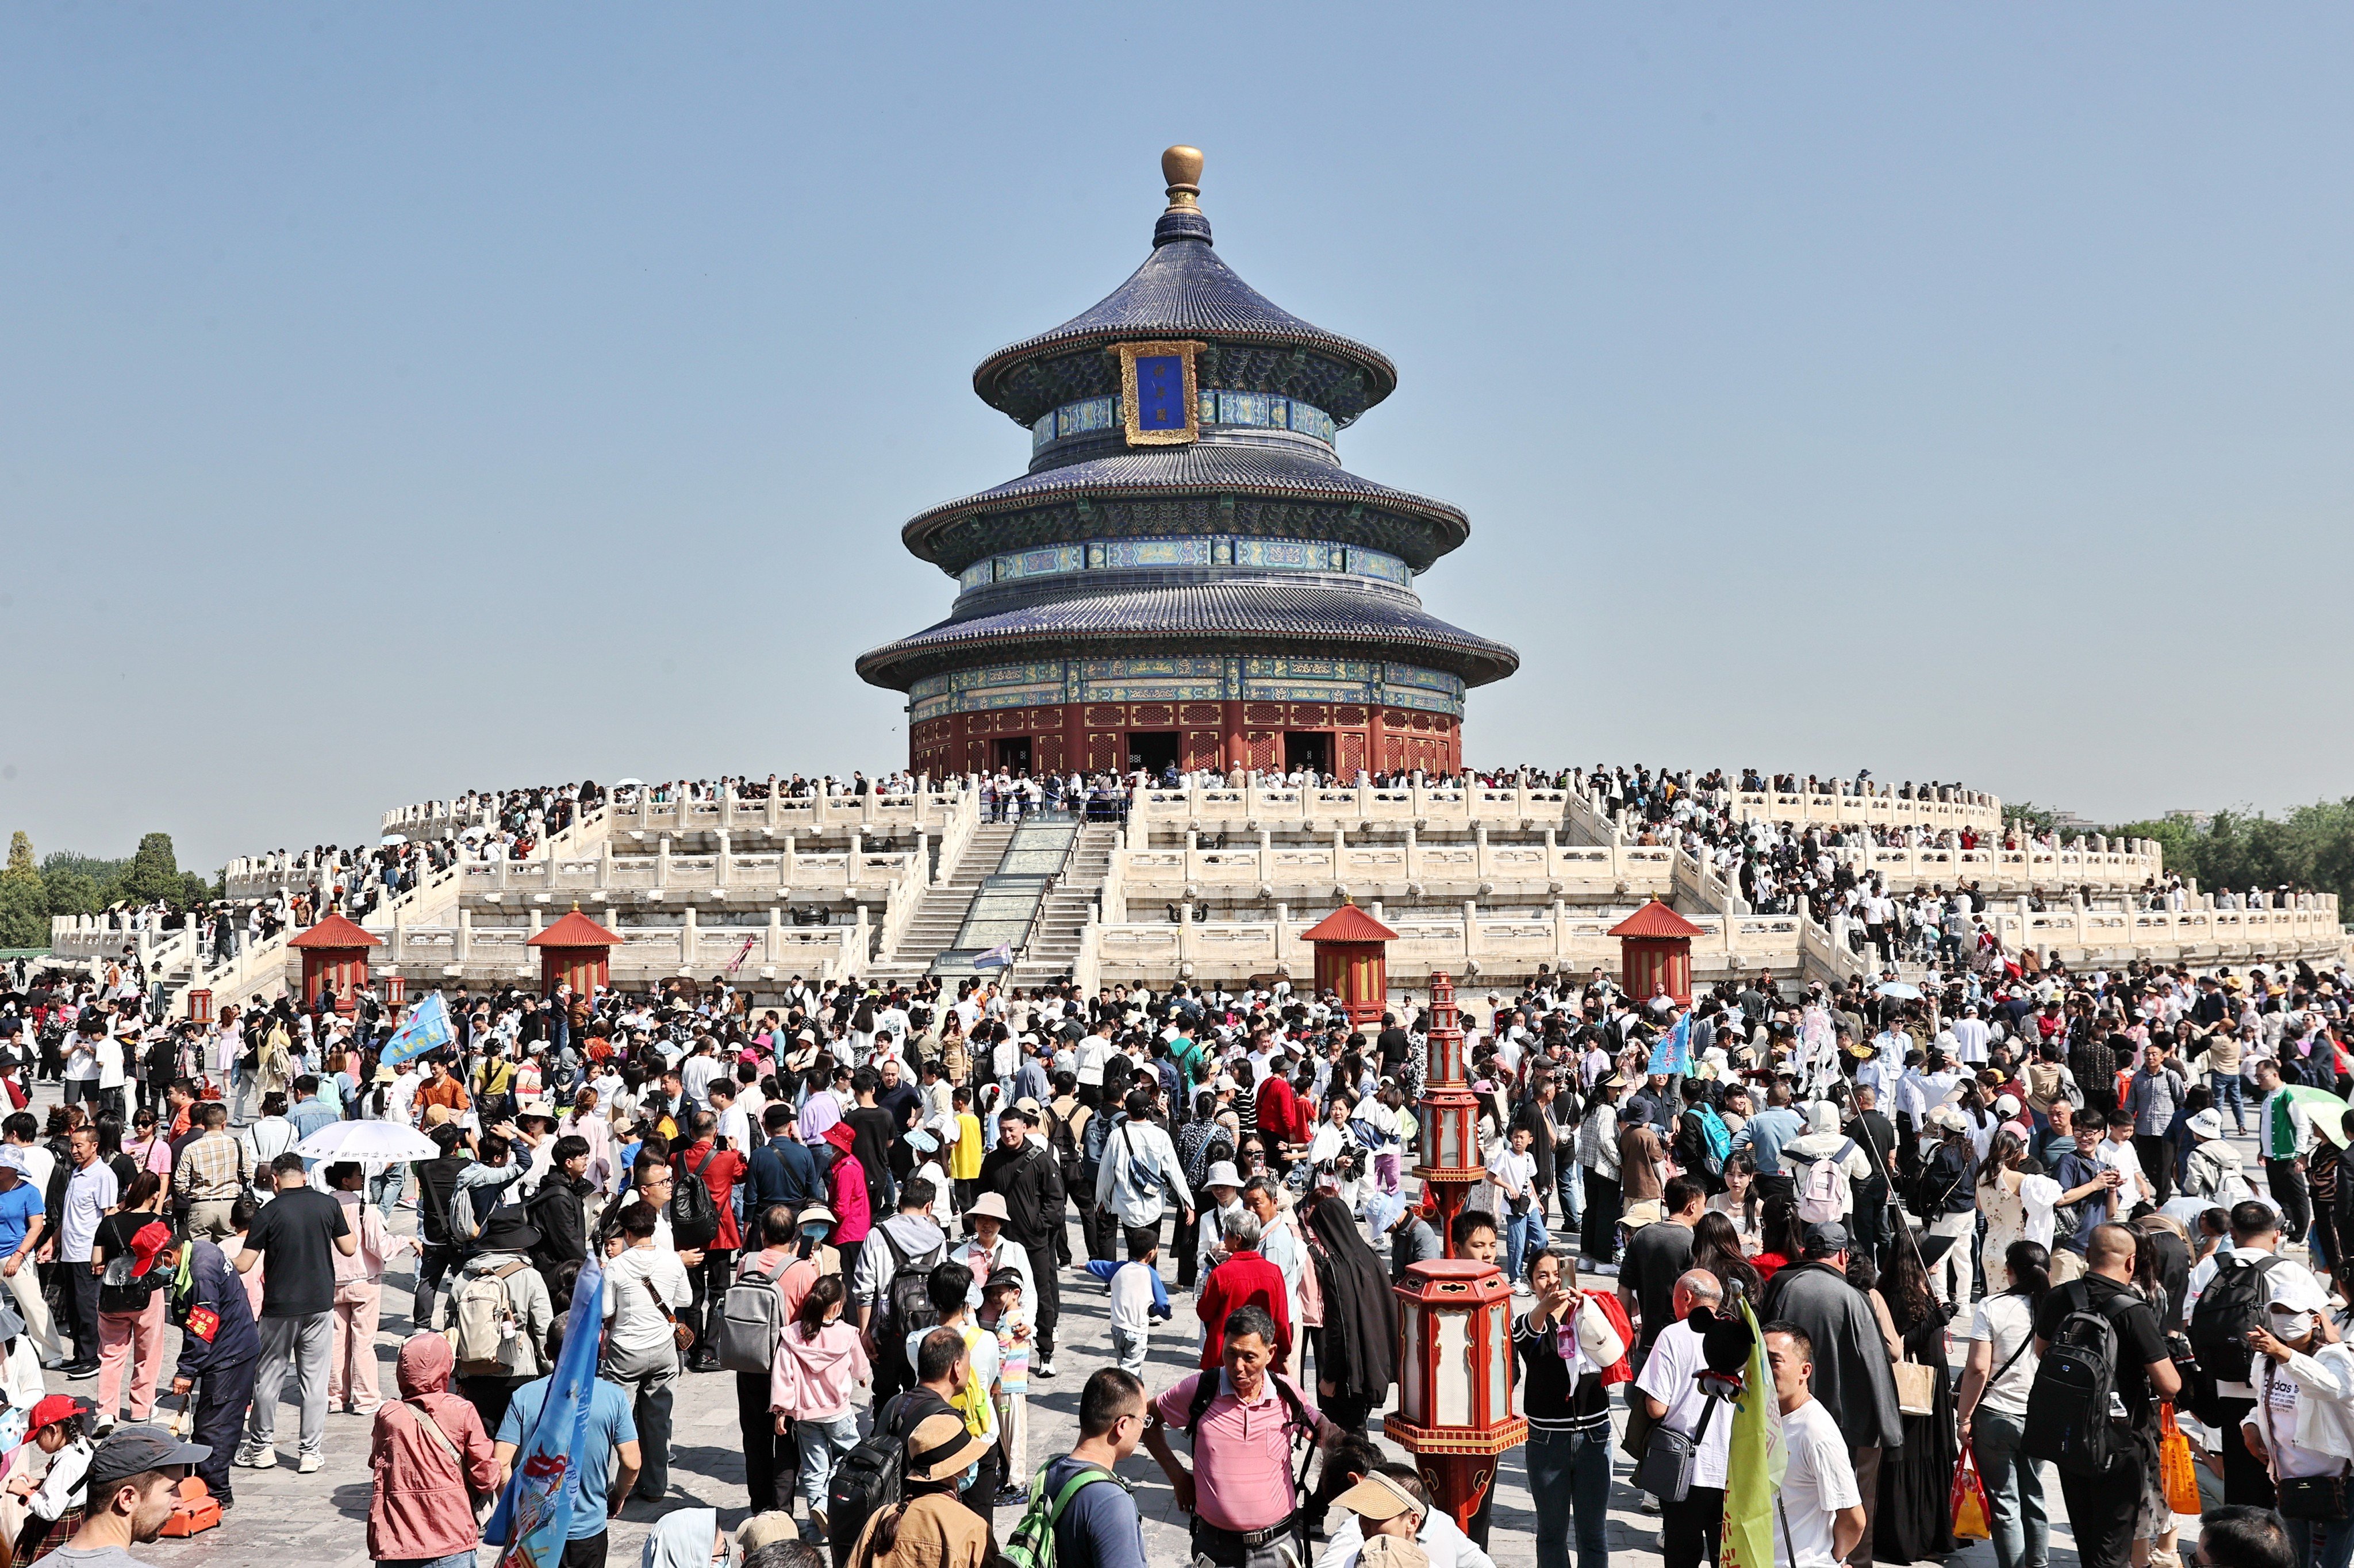 Most Beijing attractions will no longer require tickets to be reserved in advance. Photo: VCG via Getty Images